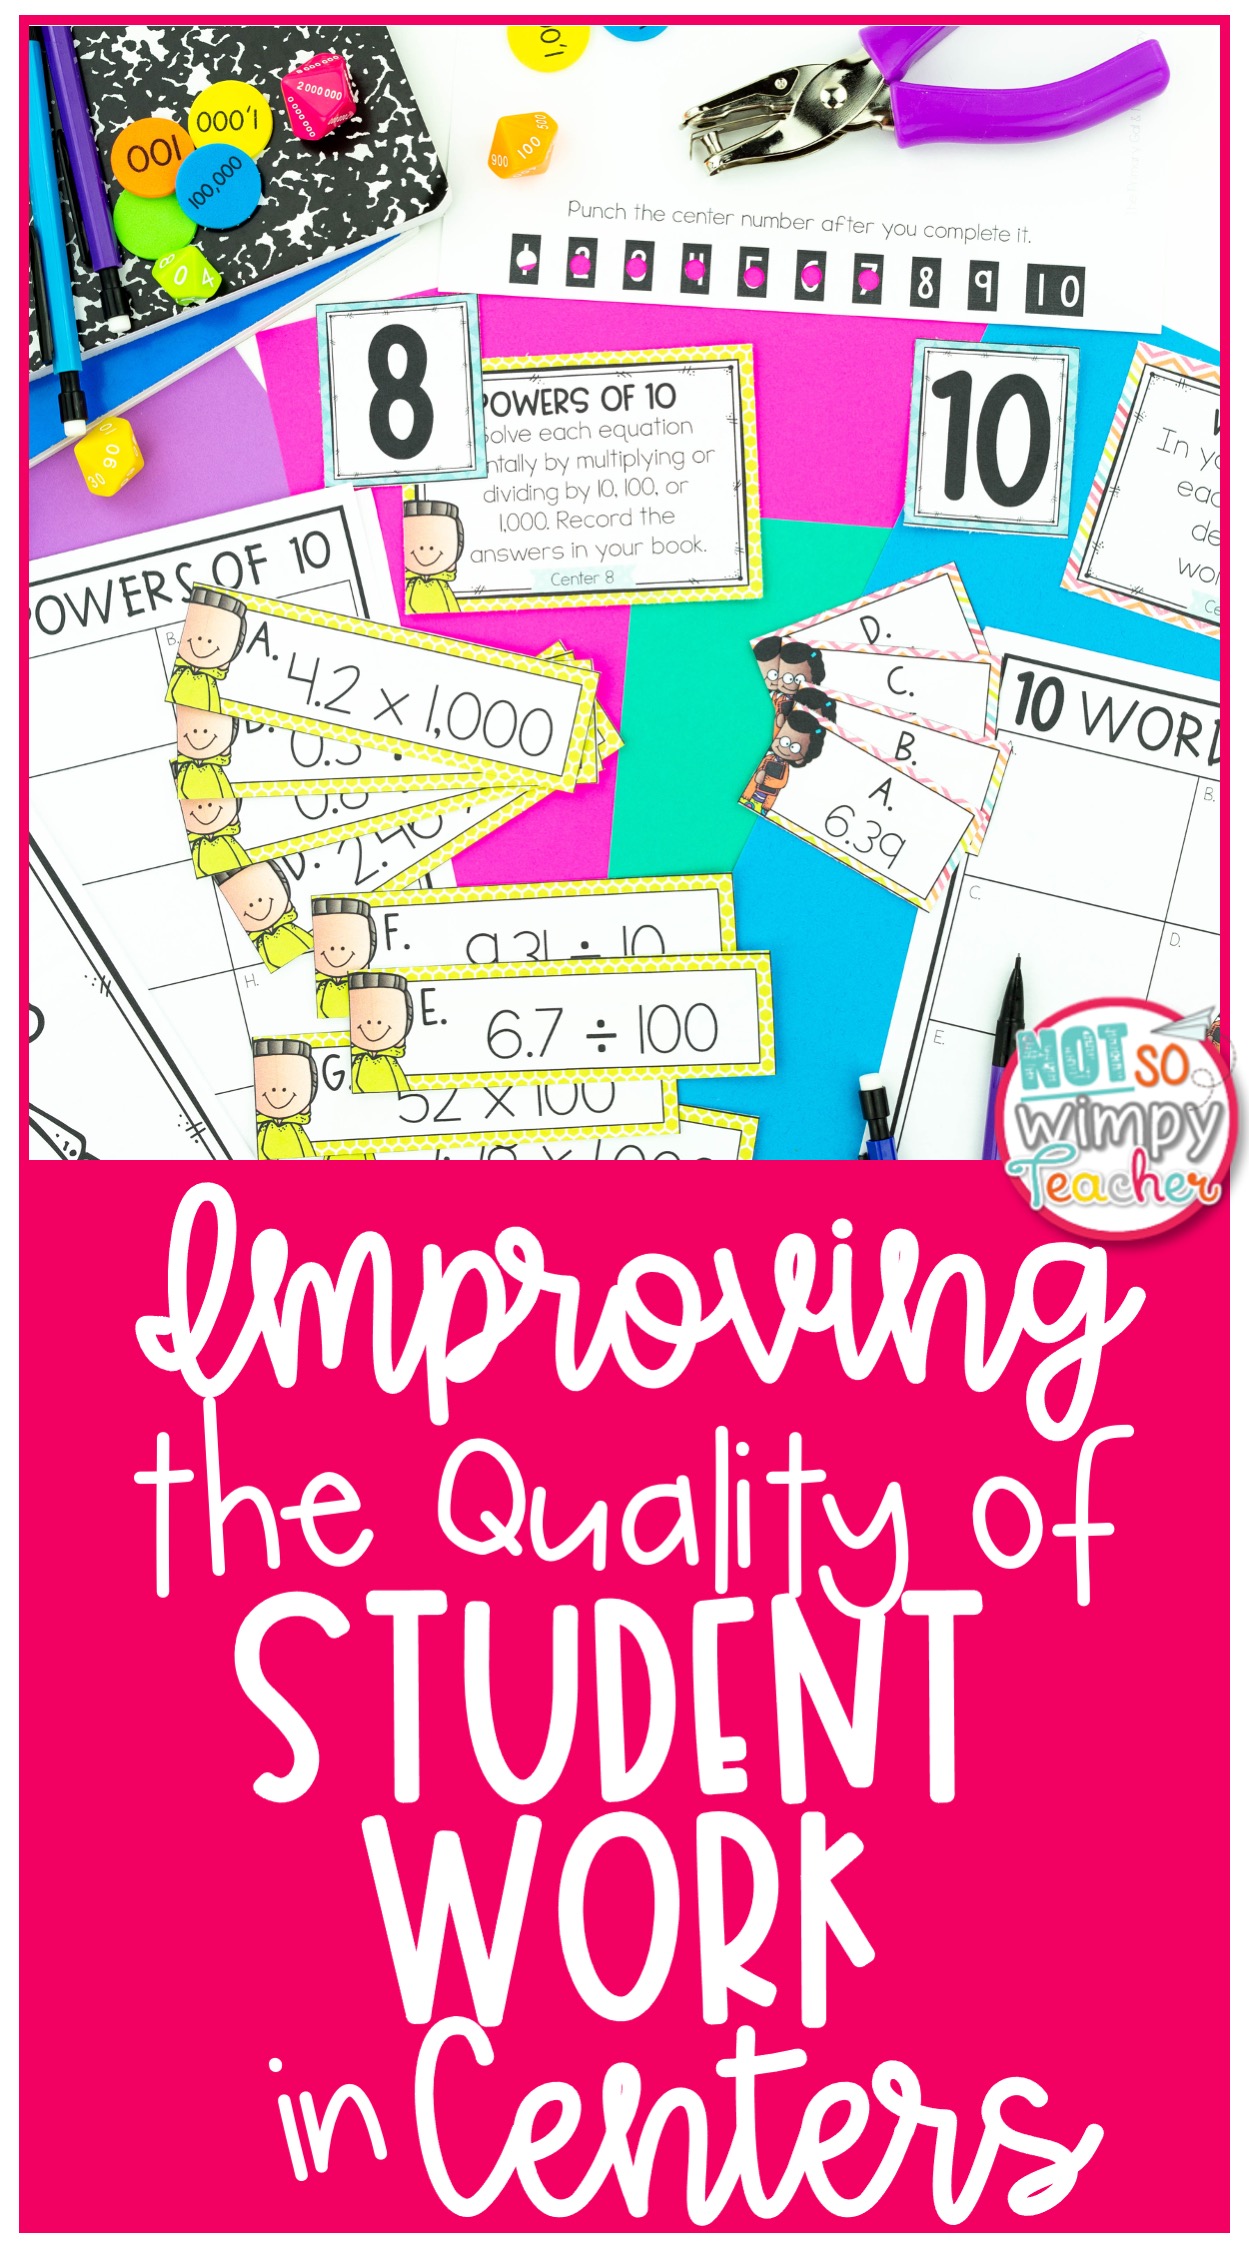 Pin featuring images of math center supplies for Improving the Quality of Student Work in Centers 